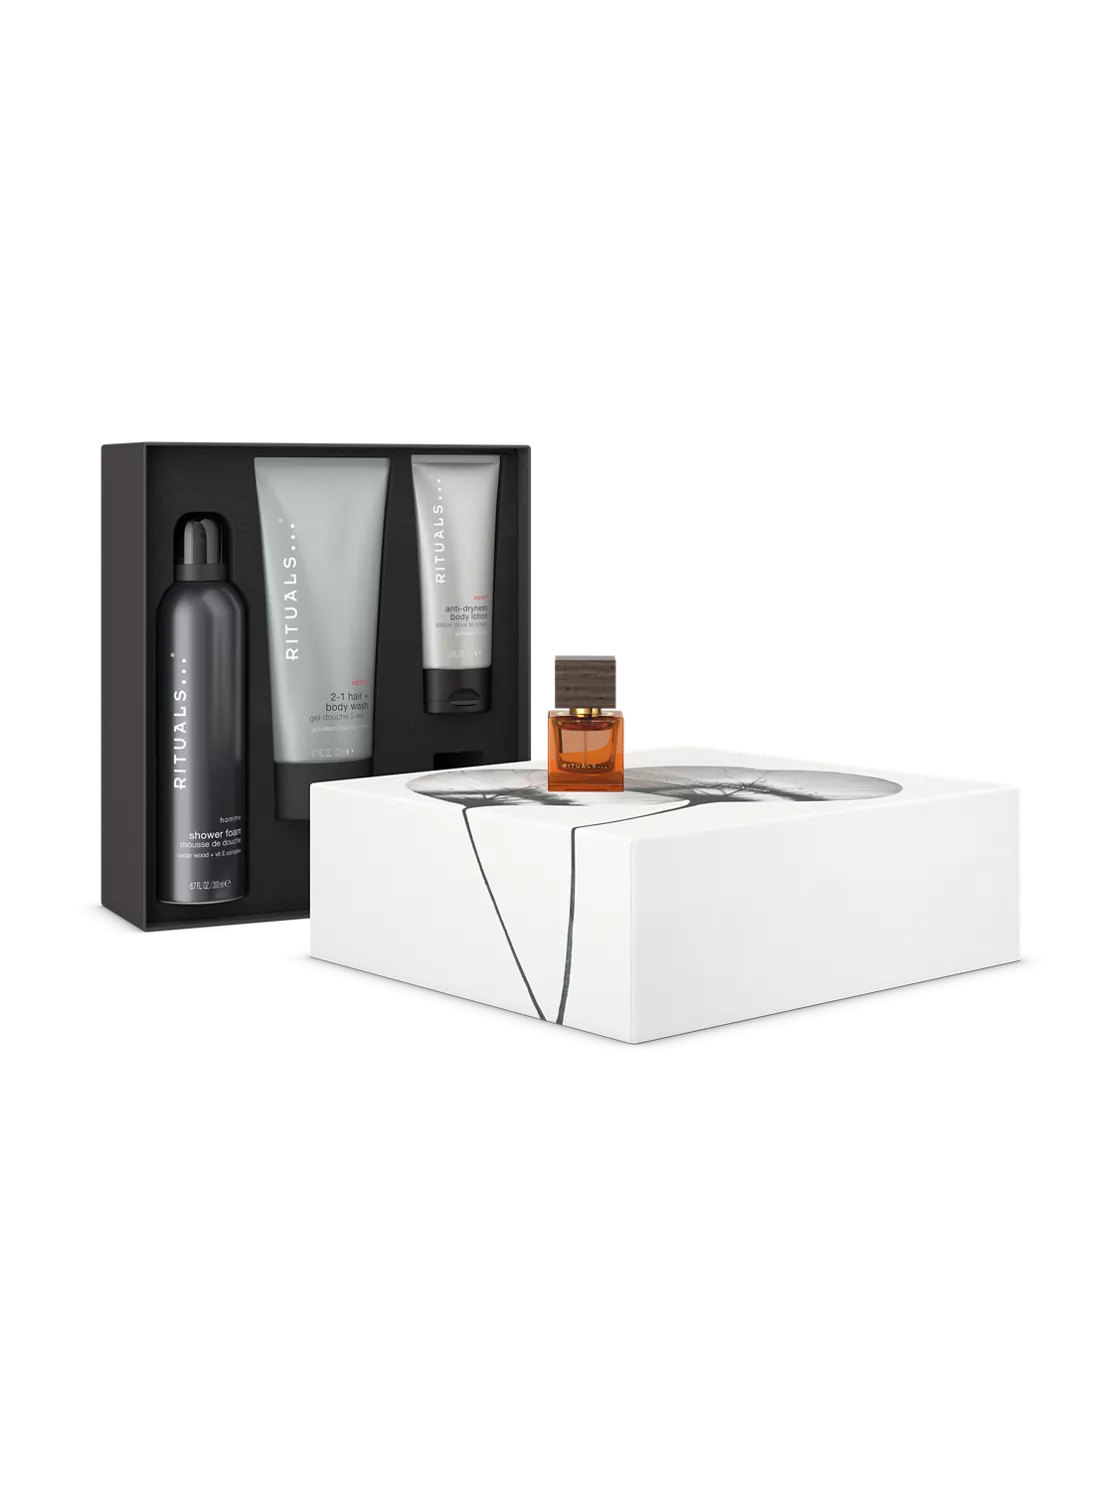 https://rituals.scene7.com/is/image/rituals/1116622-rituals-homme-giftset-m-pack-open-inlay:3-by-4?fmt=webp-alpha&hei=1488&resMode=sharp2&wid=1116